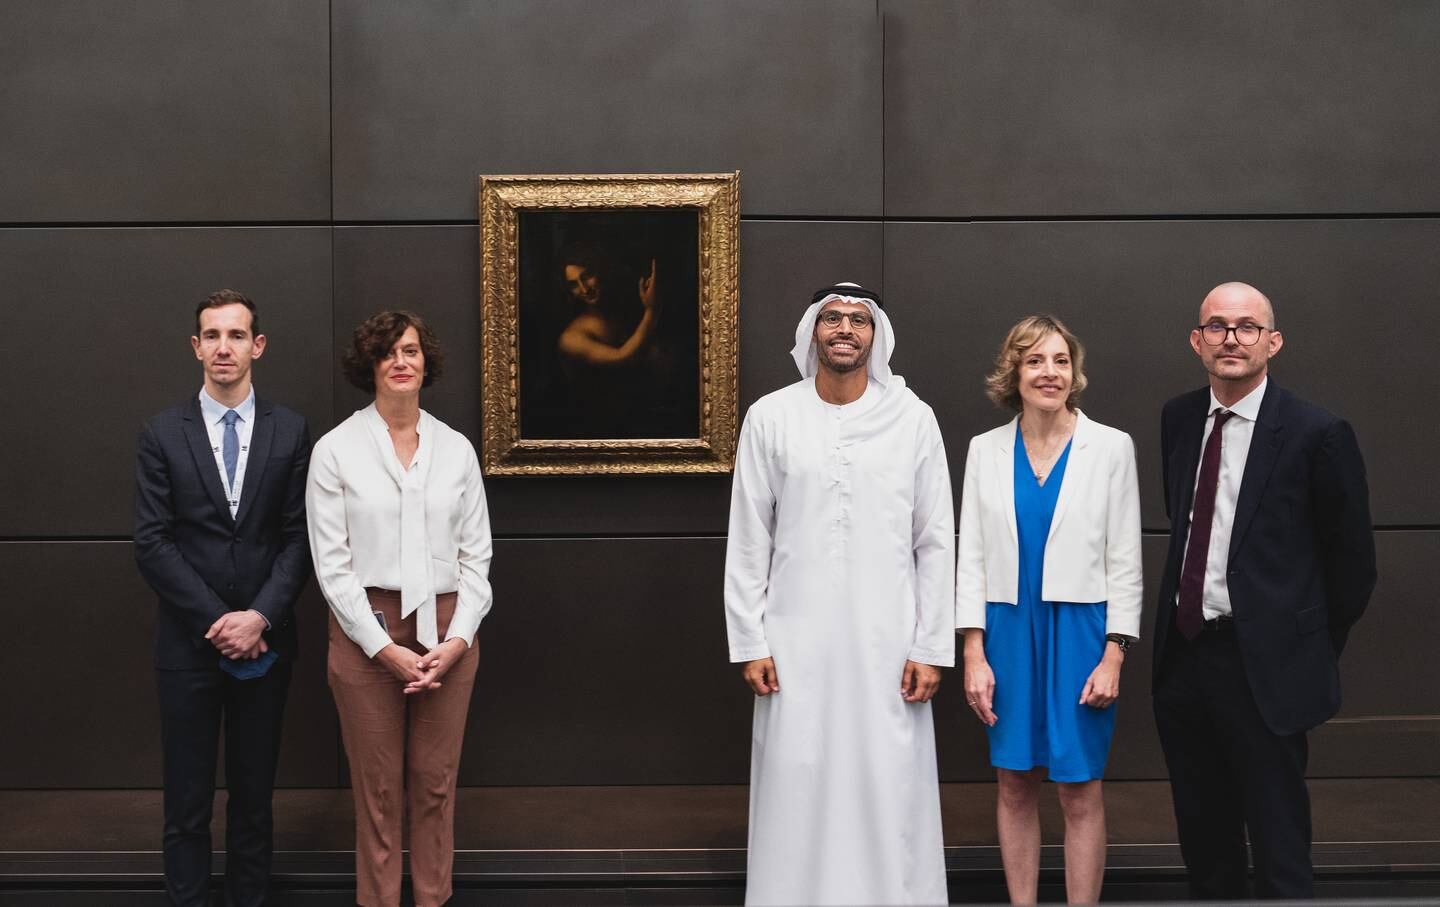 From right: Manuel Rabaté, director of Louvre Abu Dhabi, Stéphanie Debien, chargée d'affaire at the French Embassy in the UAE, Mohamed Khalifa Al Mubarak, chairman of Louvre Abu Dhabi and DCT - Abu Dhabi, Dr. Souraya Noujaim, director of the Scientific, Curatorial and Collection Management Department at Louvre Abu Dhabi, and Vincent Delieuvin, curator of Italian paintings of the 16th century at musée du Louvre's Department of Paintings. Photo: Louvre Abu Dhabi